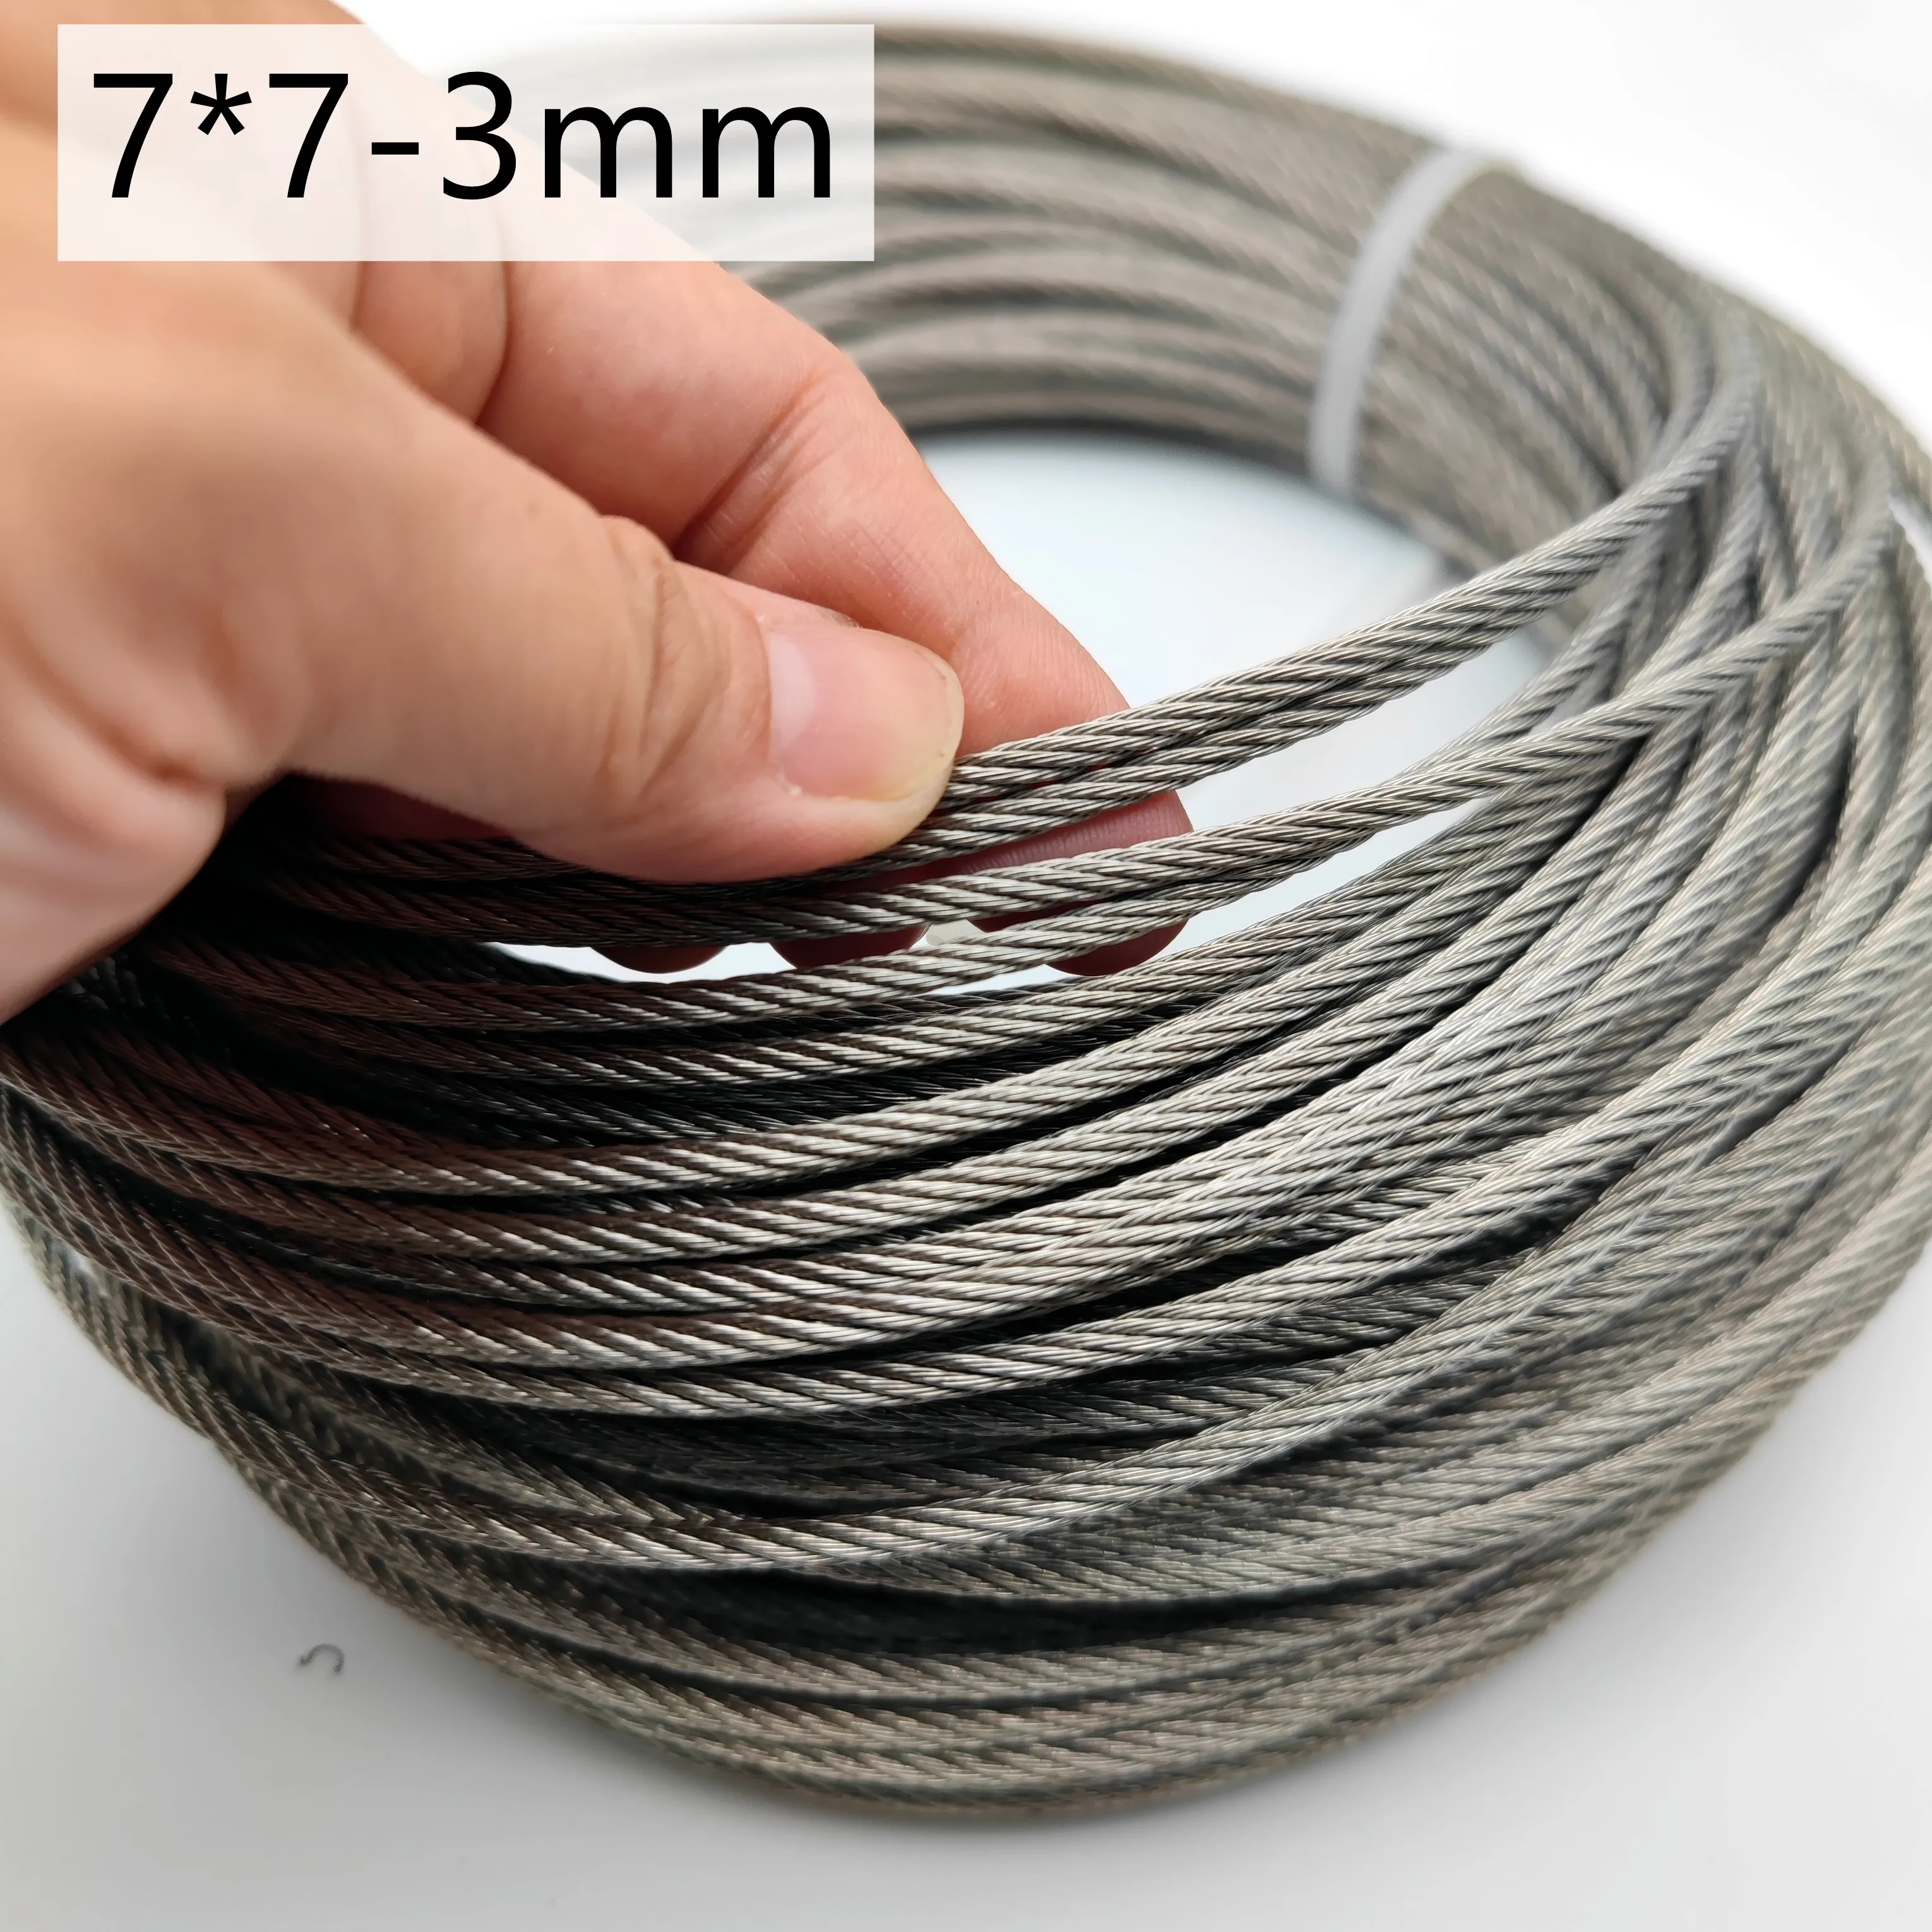 

10M/20M/30M/40M/50M/60M/80/100M 3mm Diameter 7X7 Construction 304 Stainless steel Wire rope Alambre Softer Fishing Lifting Cable